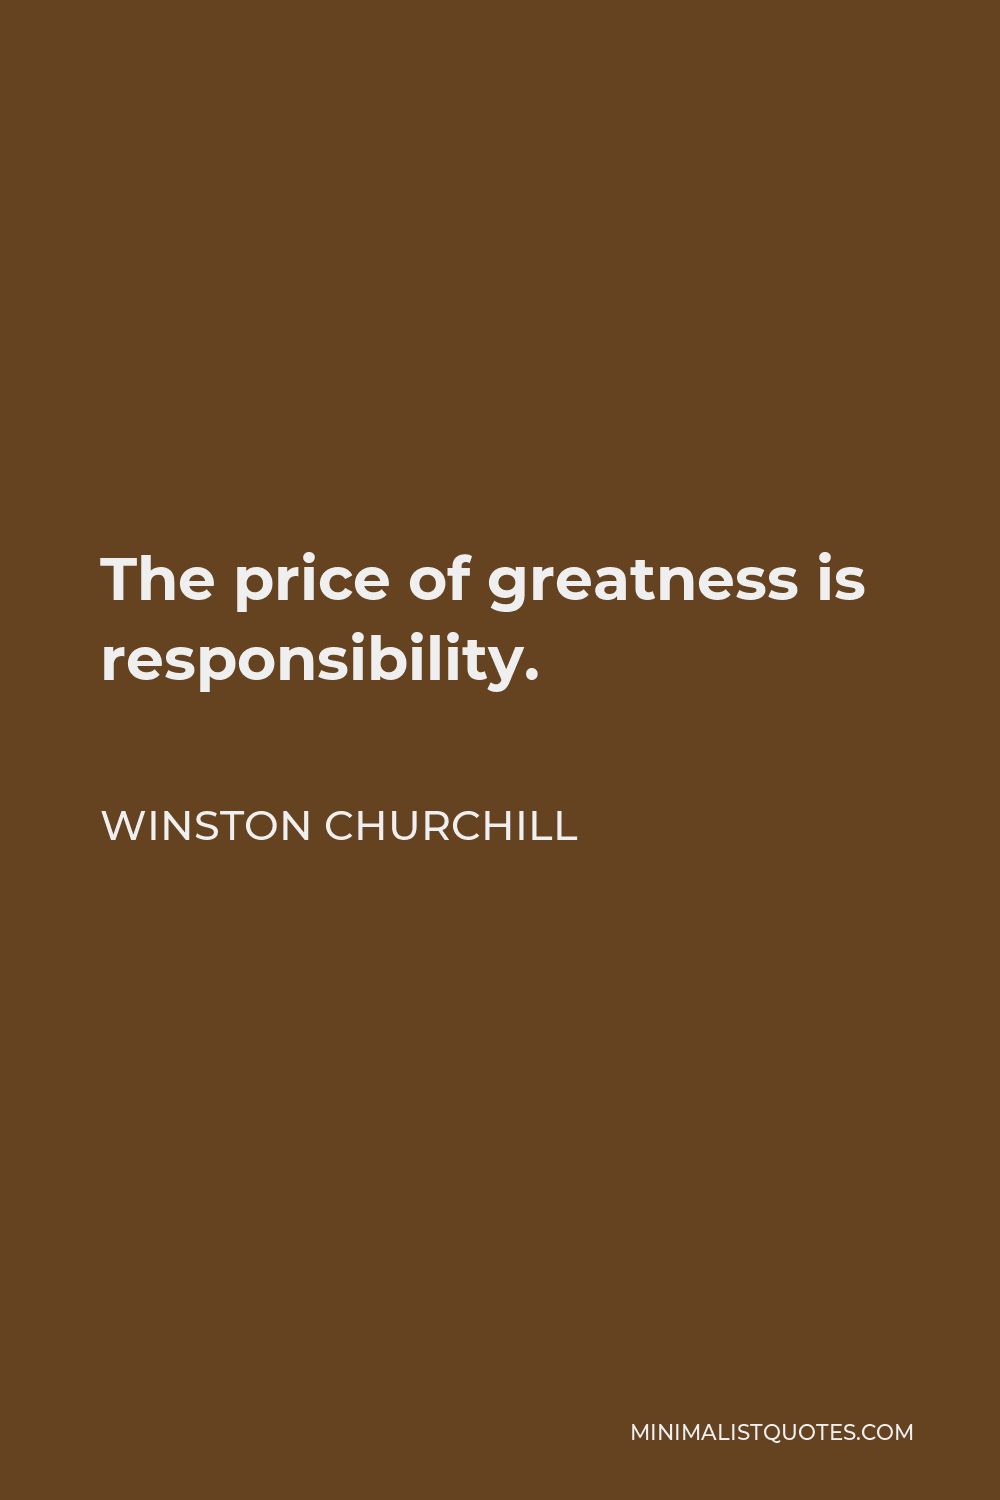 Winston Churchill Quote - The price of greatness is responsibility.